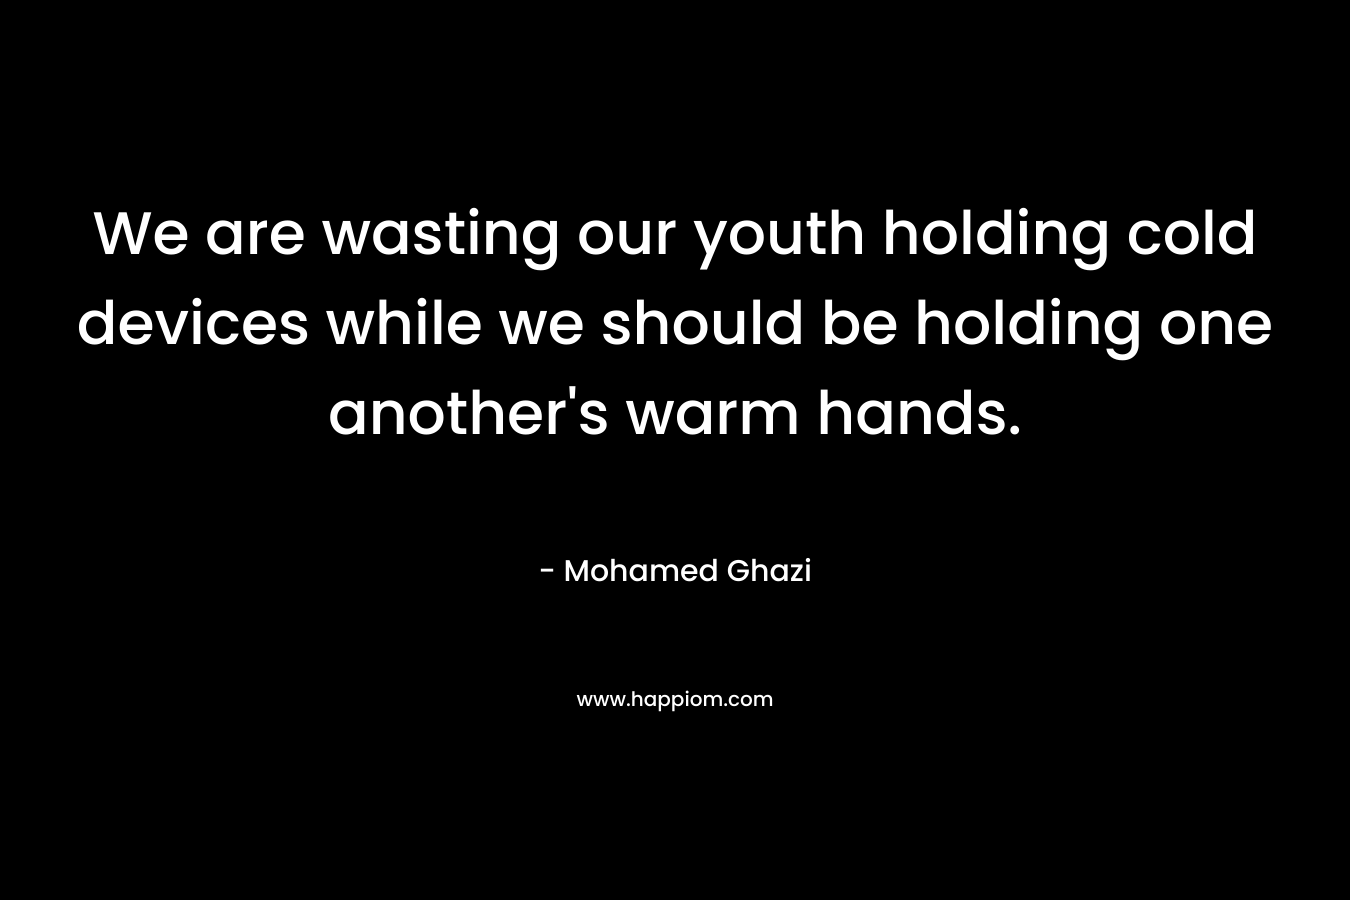 We are wasting our youth holding cold devices while we should be holding one another's warm hands.